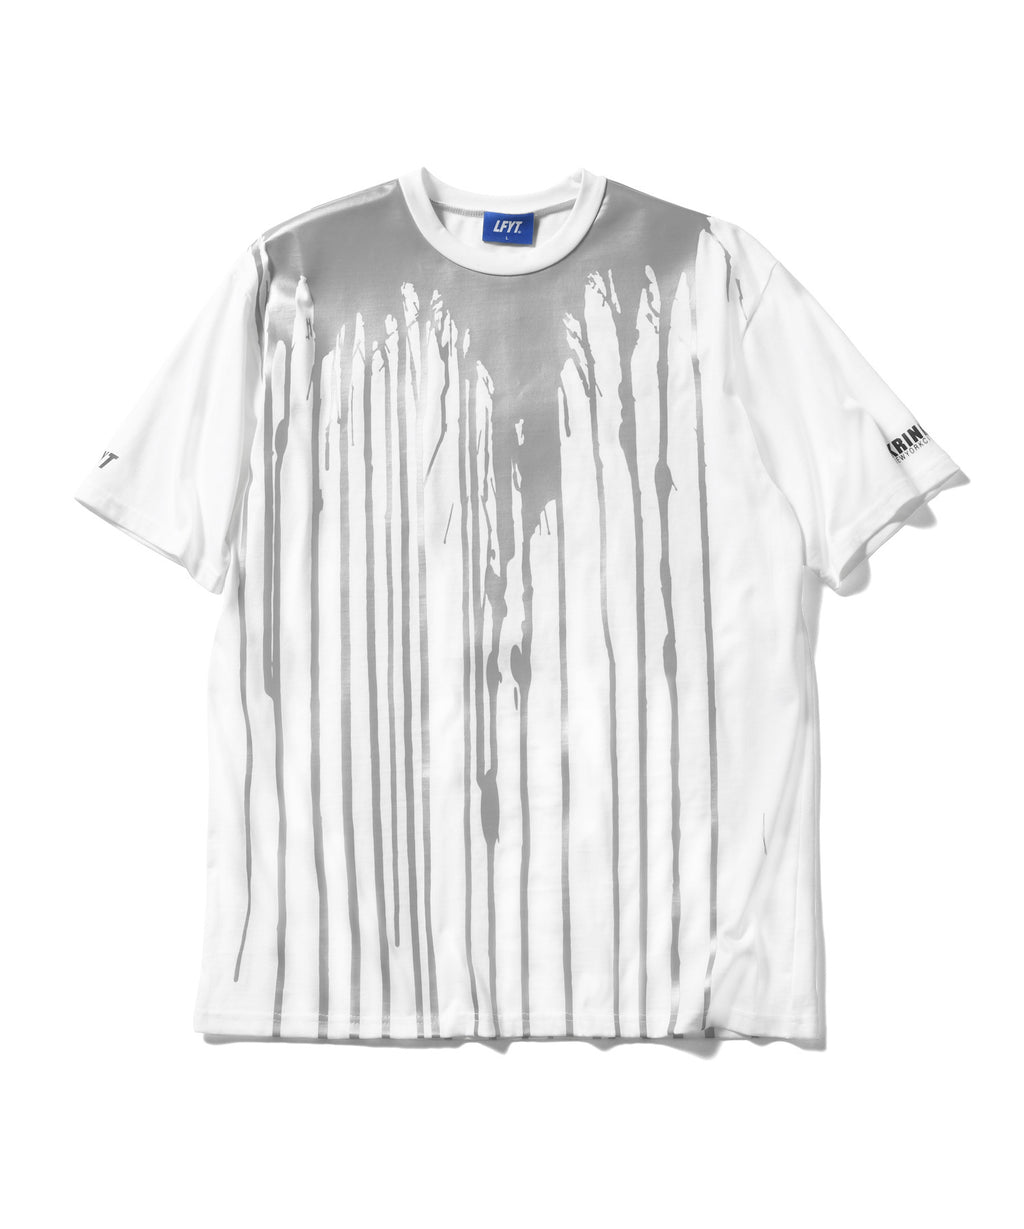 LFYT × KRINK REFLECTOR DRIPPING TEE LS220125 WHITE